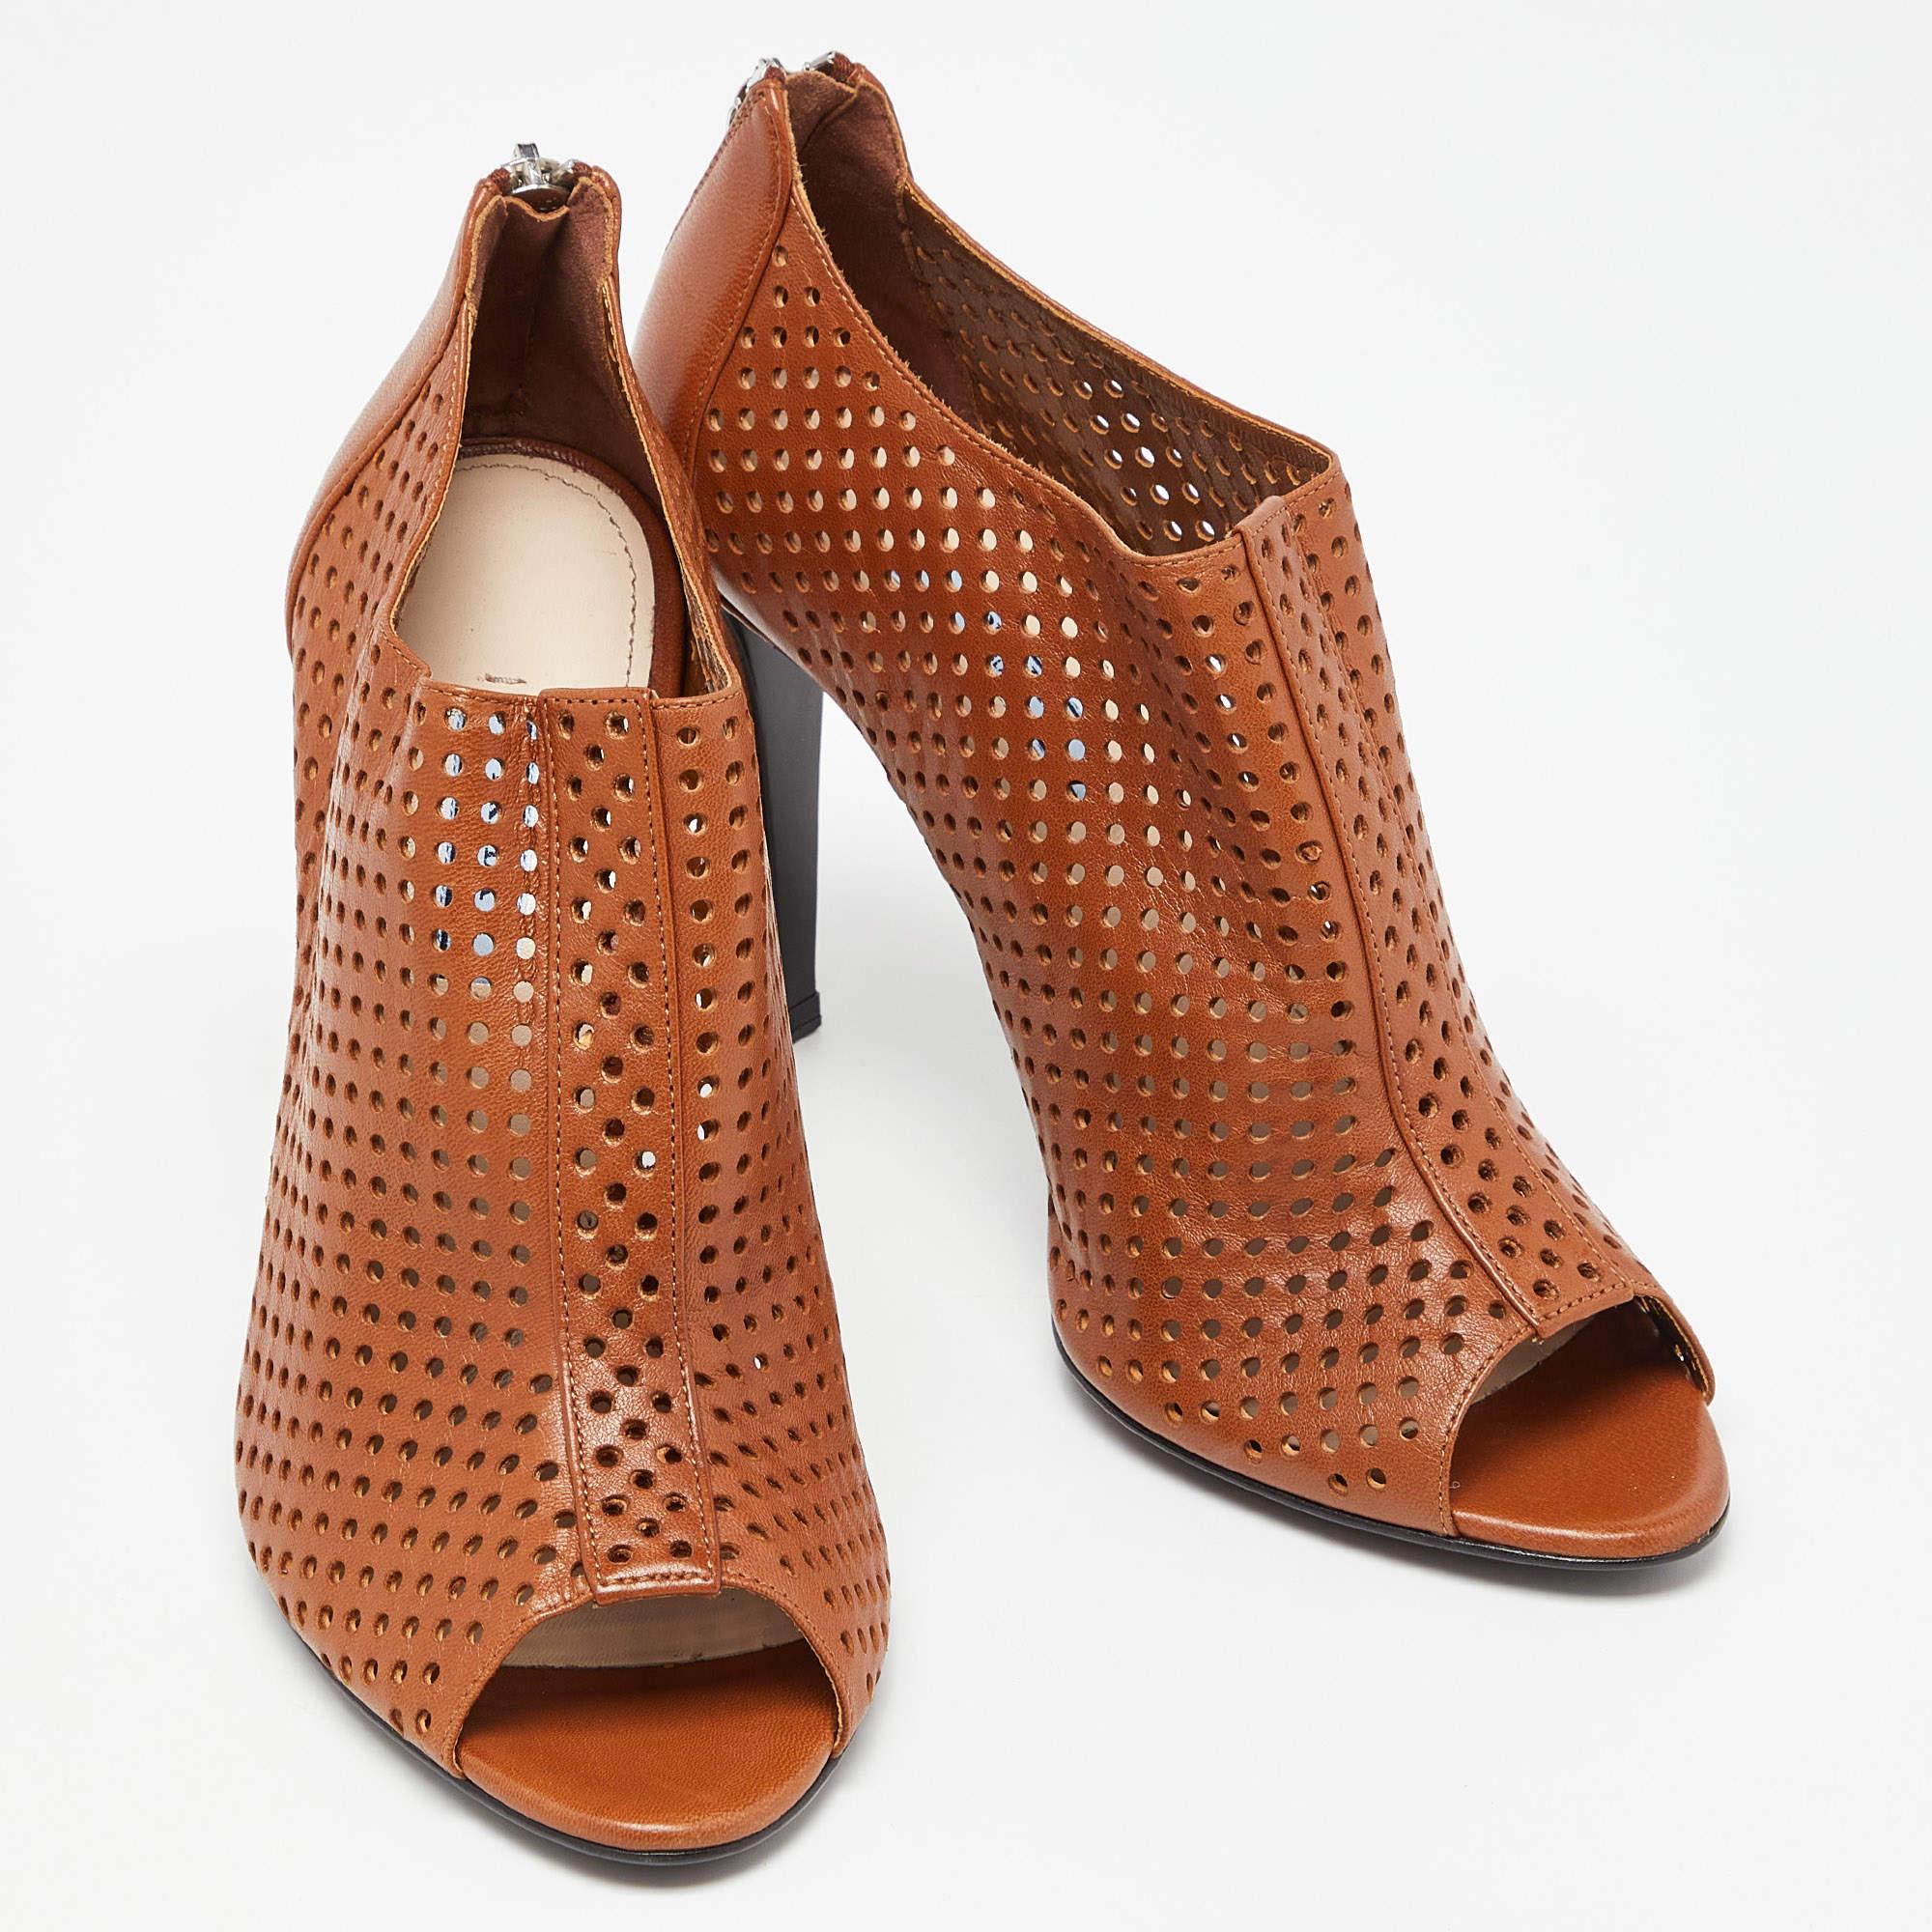 Prada Brown Perforated Leather Peep Toe Ankle Booties Size 39 1